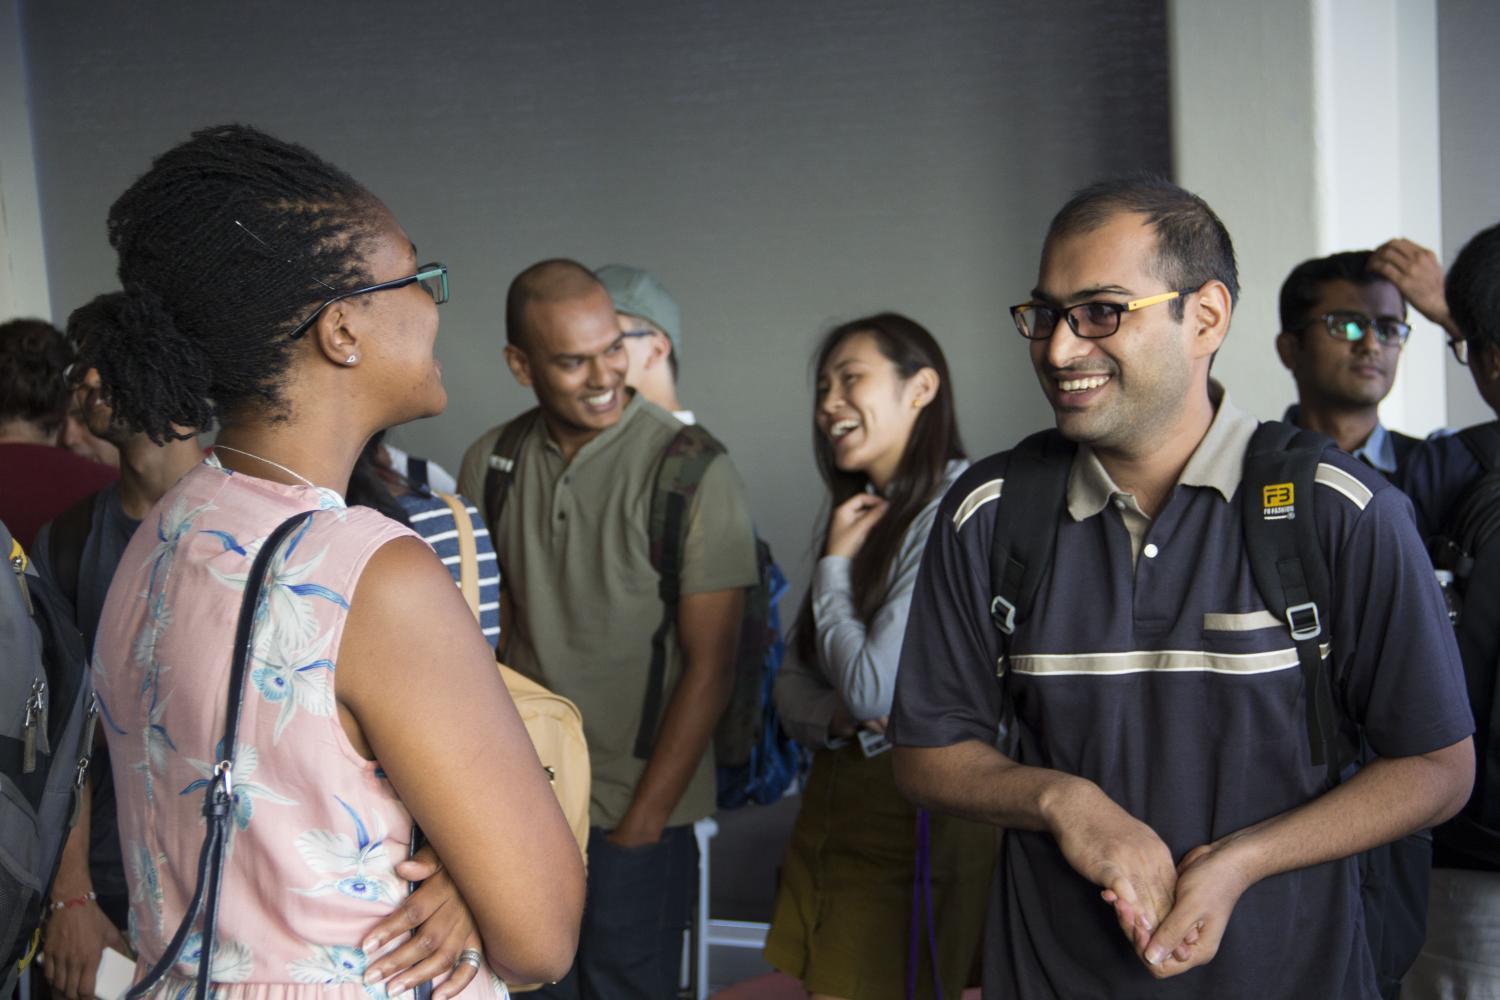 This summer, the Center for Student Life opened the International Student Center, where international students can meet, connect and learn about new resources.
